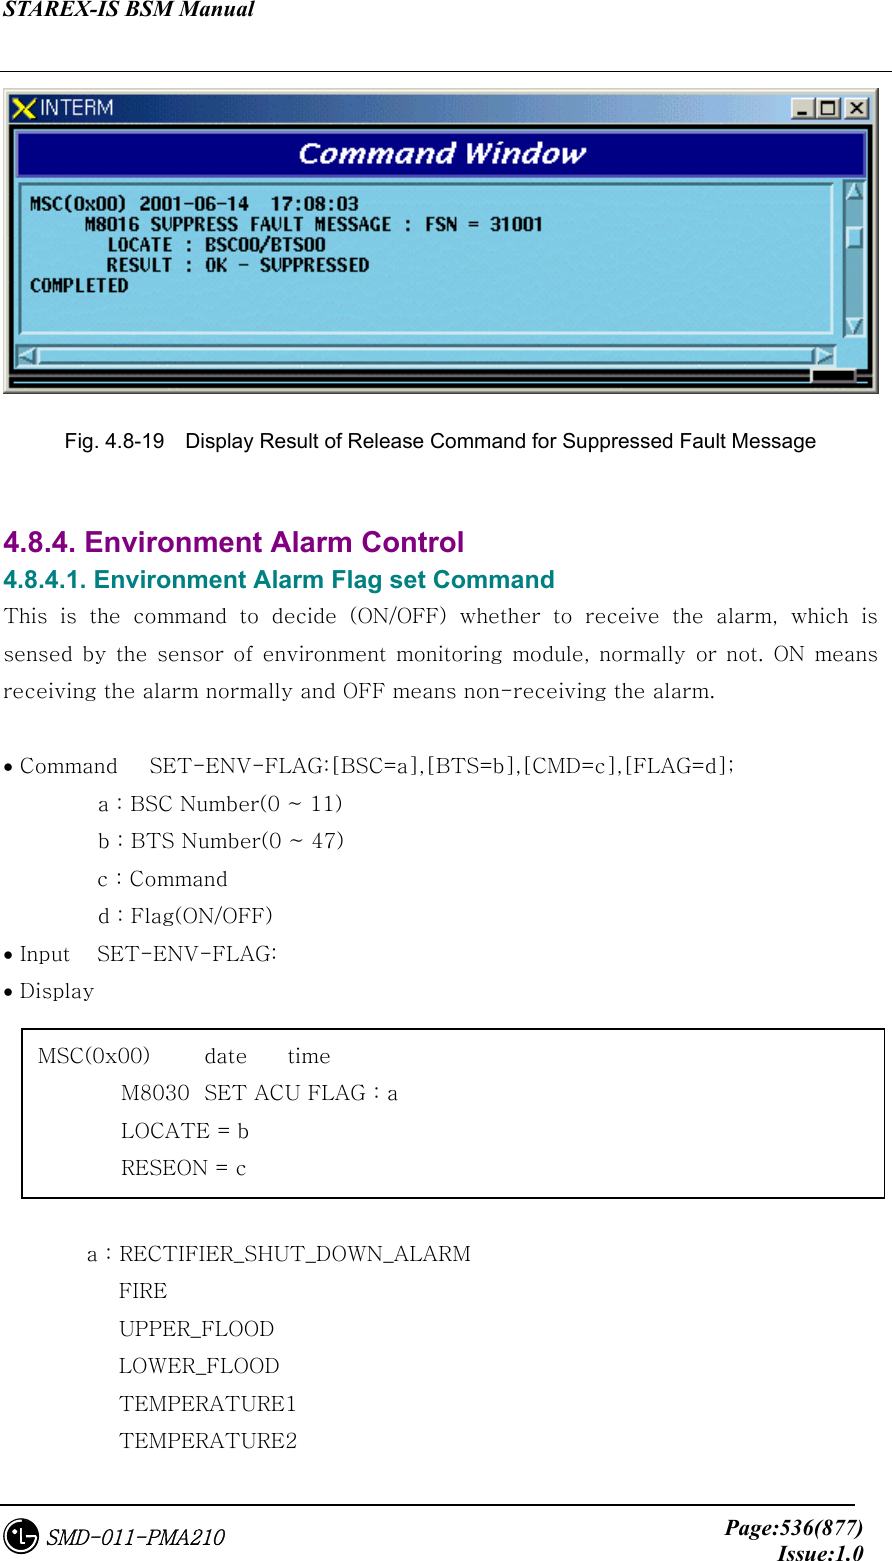 STAREX-IS BSM Manual     Page:536(877)Issue:1.0SMD-011-PMA210  Fig. 4.8-19    Display Result of Release Command for Suppressed Fault Message  4.8.4. Environment Alarm Control 4.8.4.1. Environment Alarm Flag set Command This  is  the  command  to  decide  (ON/OFF)  whether  to  receive  the  alarm,  which  is sensed  by  the  sensor  of  environment monitoring  module, normally or not. ON means receiving the alarm normally and OFF means non-receiving the alarm.  • Command   SET-ENV-FLAG:[BSC=a],[BTS=b],[CMD=c],[FLAG=d];           a : BSC Number(0 ~ 11)          b : BTS Number(0 ~ 47)     c : Command          d : Flag(ON/OFF) • Input   SET-ENV-FLAG: • Display           a : RECTIFIER_SHUT_DOWN_ALARM            FIRE            UPPER_FLOOD            LOWER_FLOOD            TEMPERATURE1            TEMPERATURE2 MSC(0x00)  date  time   M8030  SET ACU FLAG : a   LOCATE = b   RESEON = c 